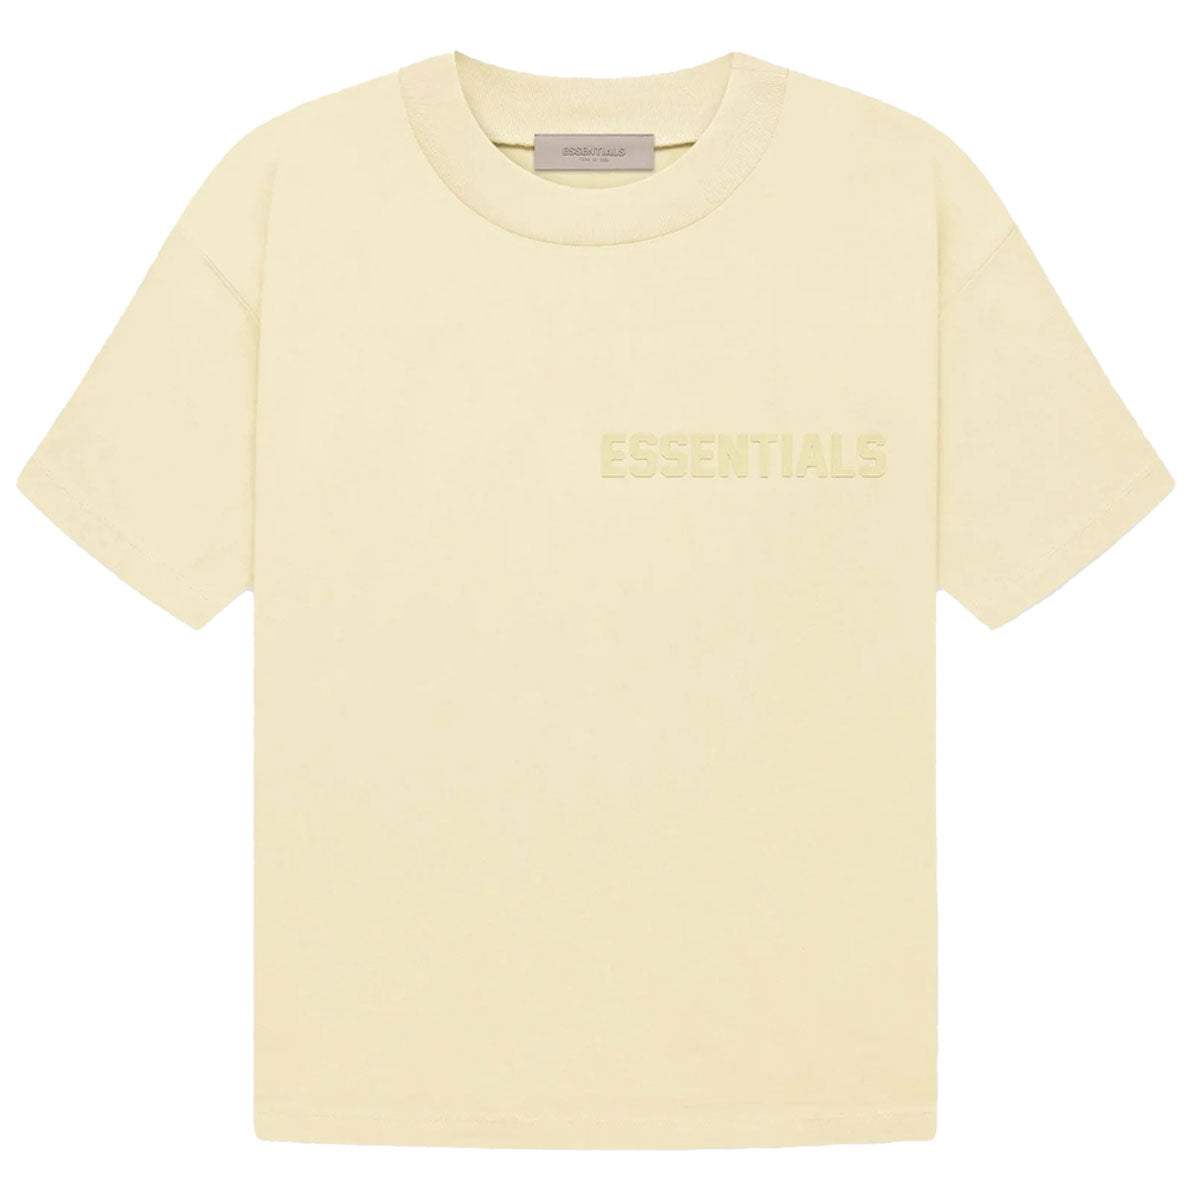 Womens SS Tee - Why are you here?